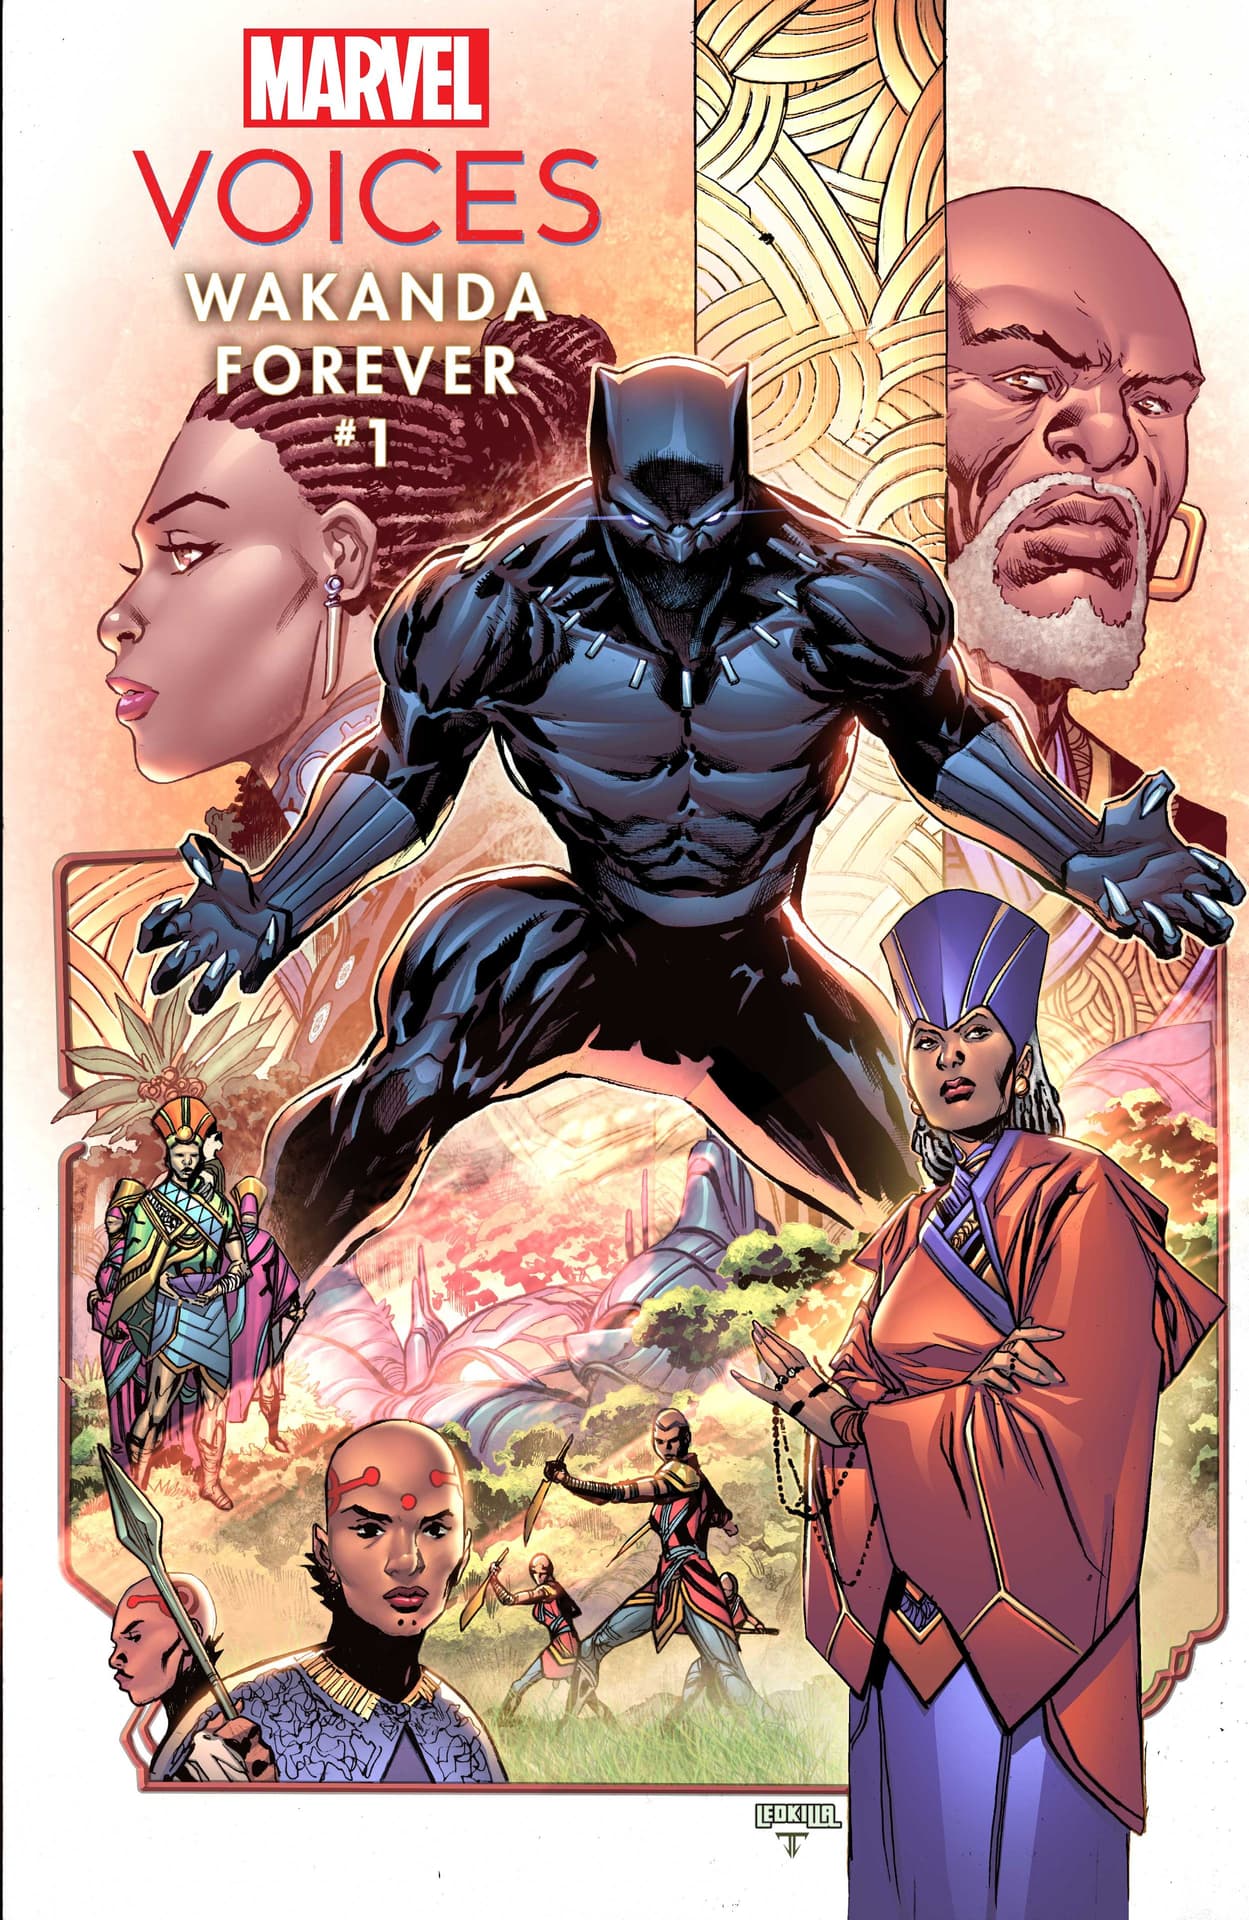 MARVEL'S VOICES: WAKANDA FOREVER cover by Ken Lashley